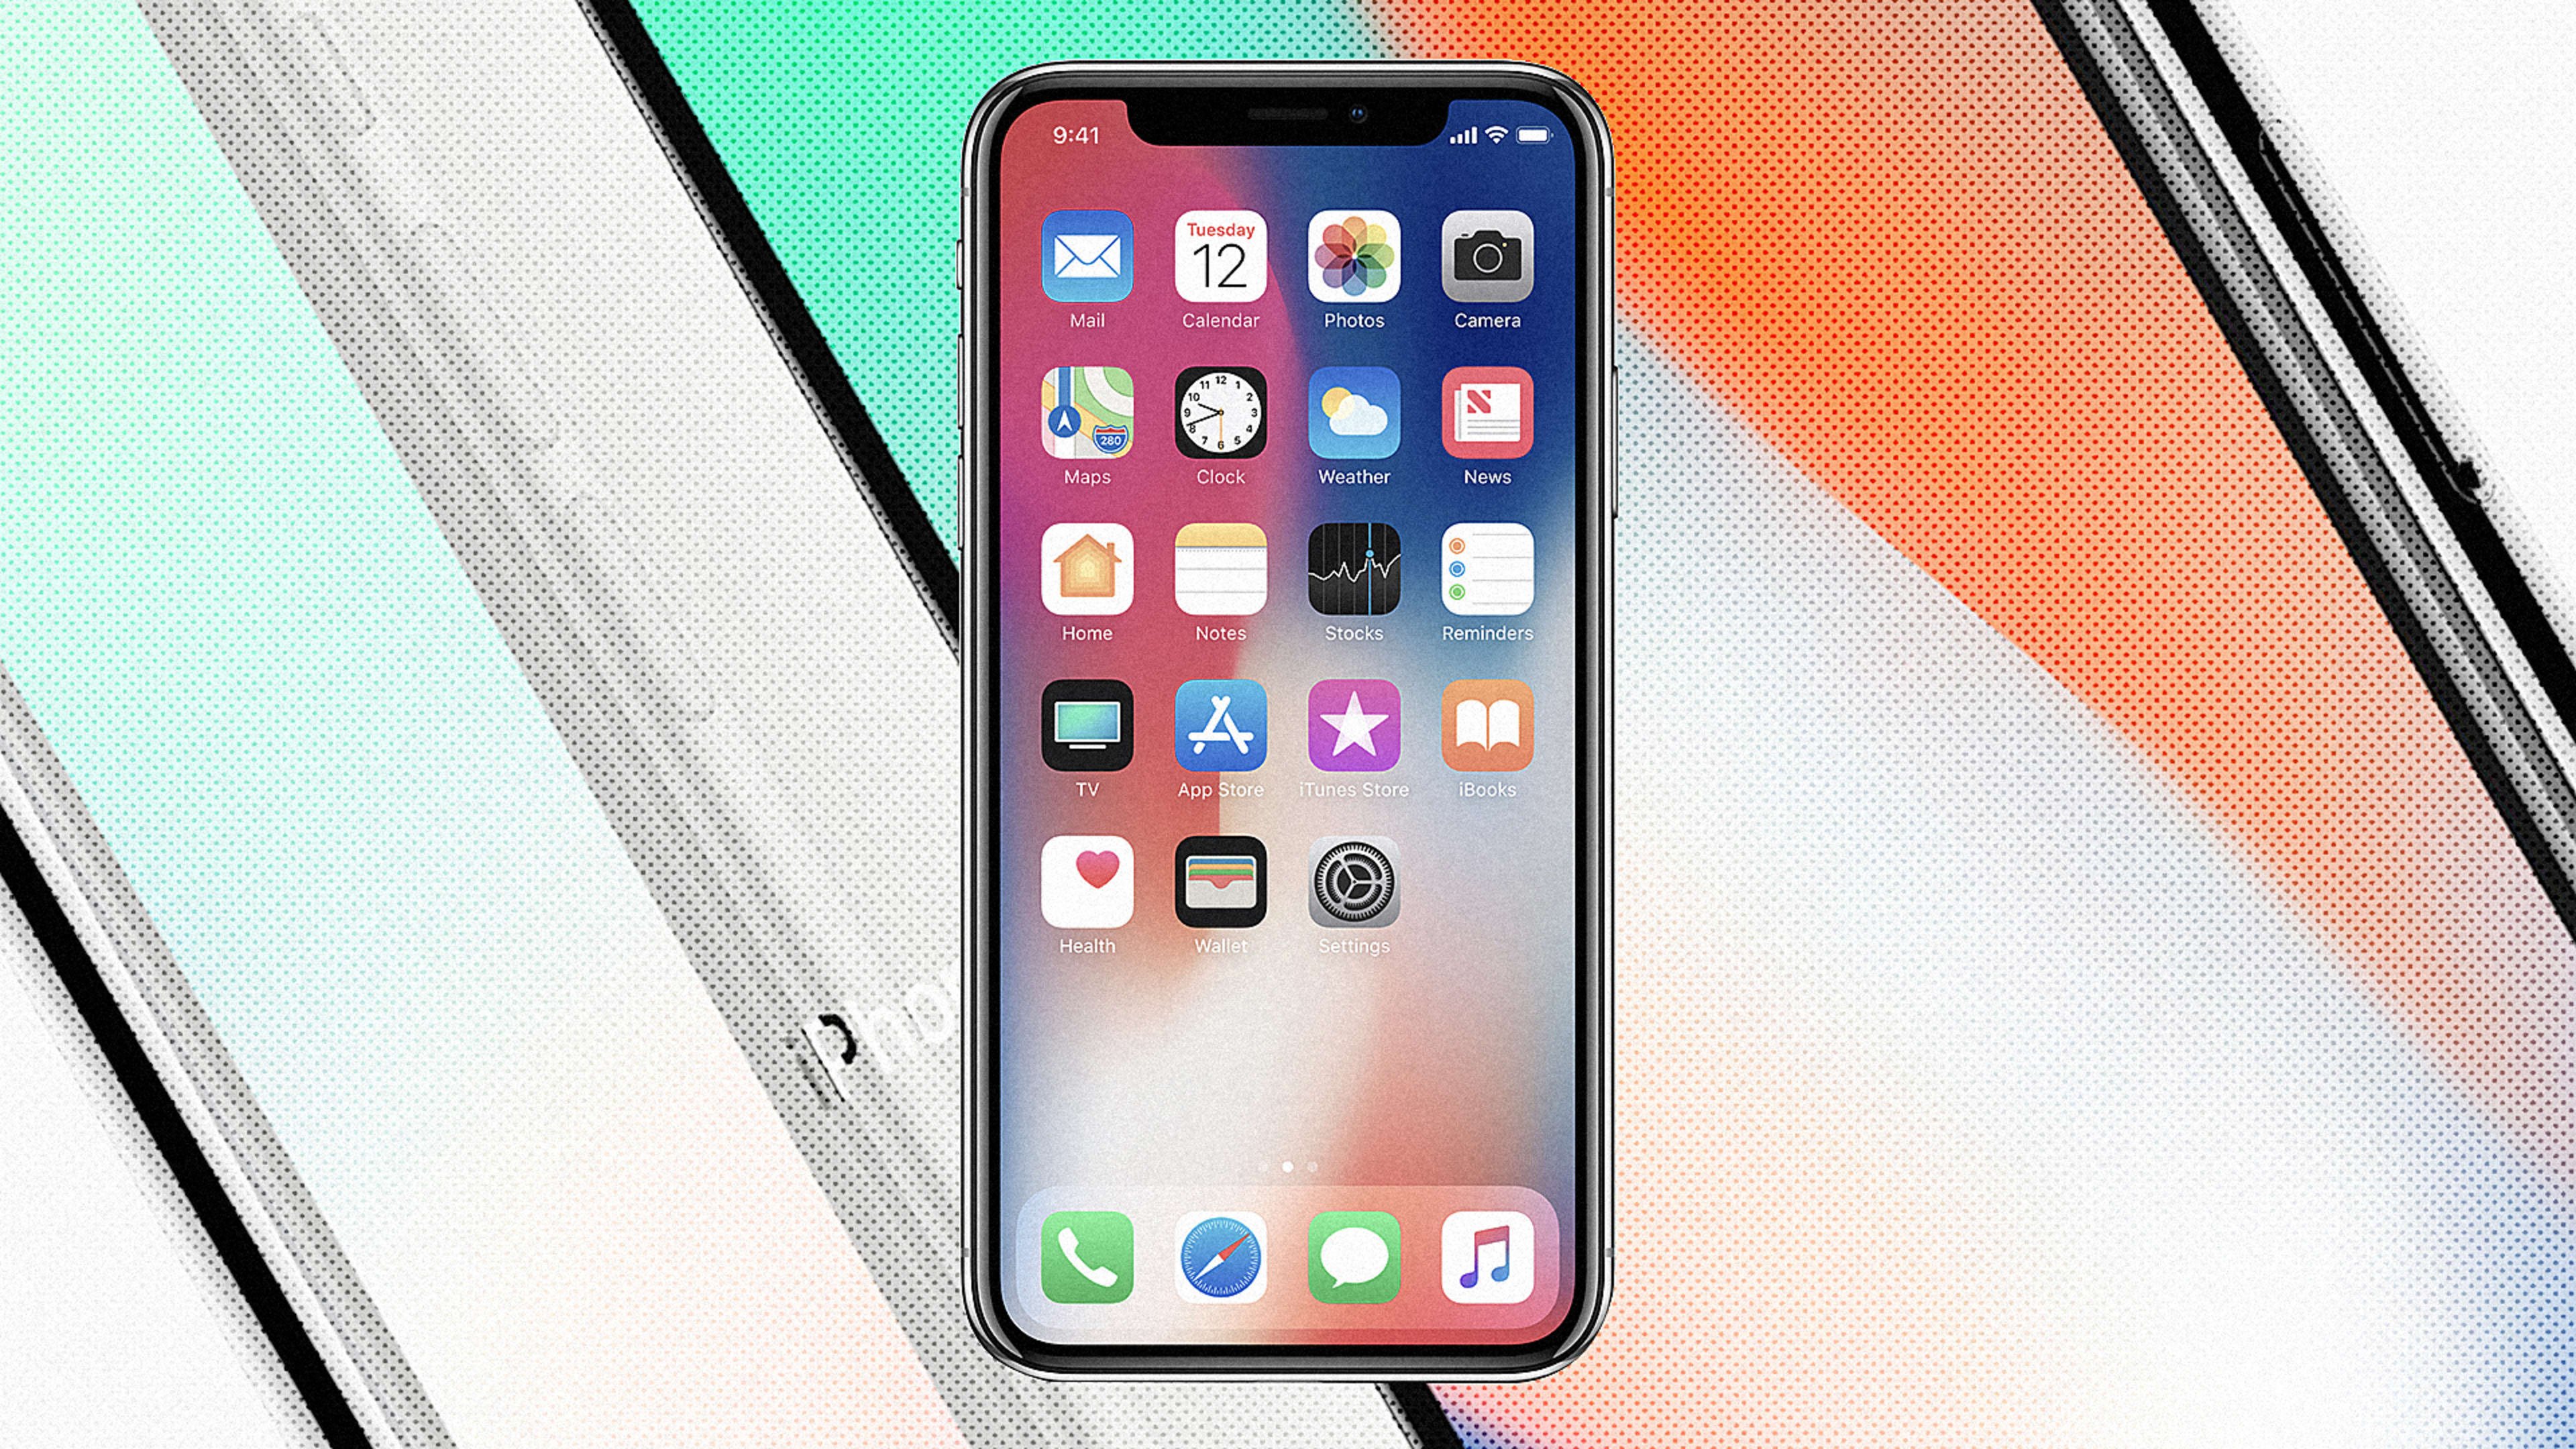 The iPhone X Is An Engineering Marvel, But It’s Not A Reinvention Of The Smartphone